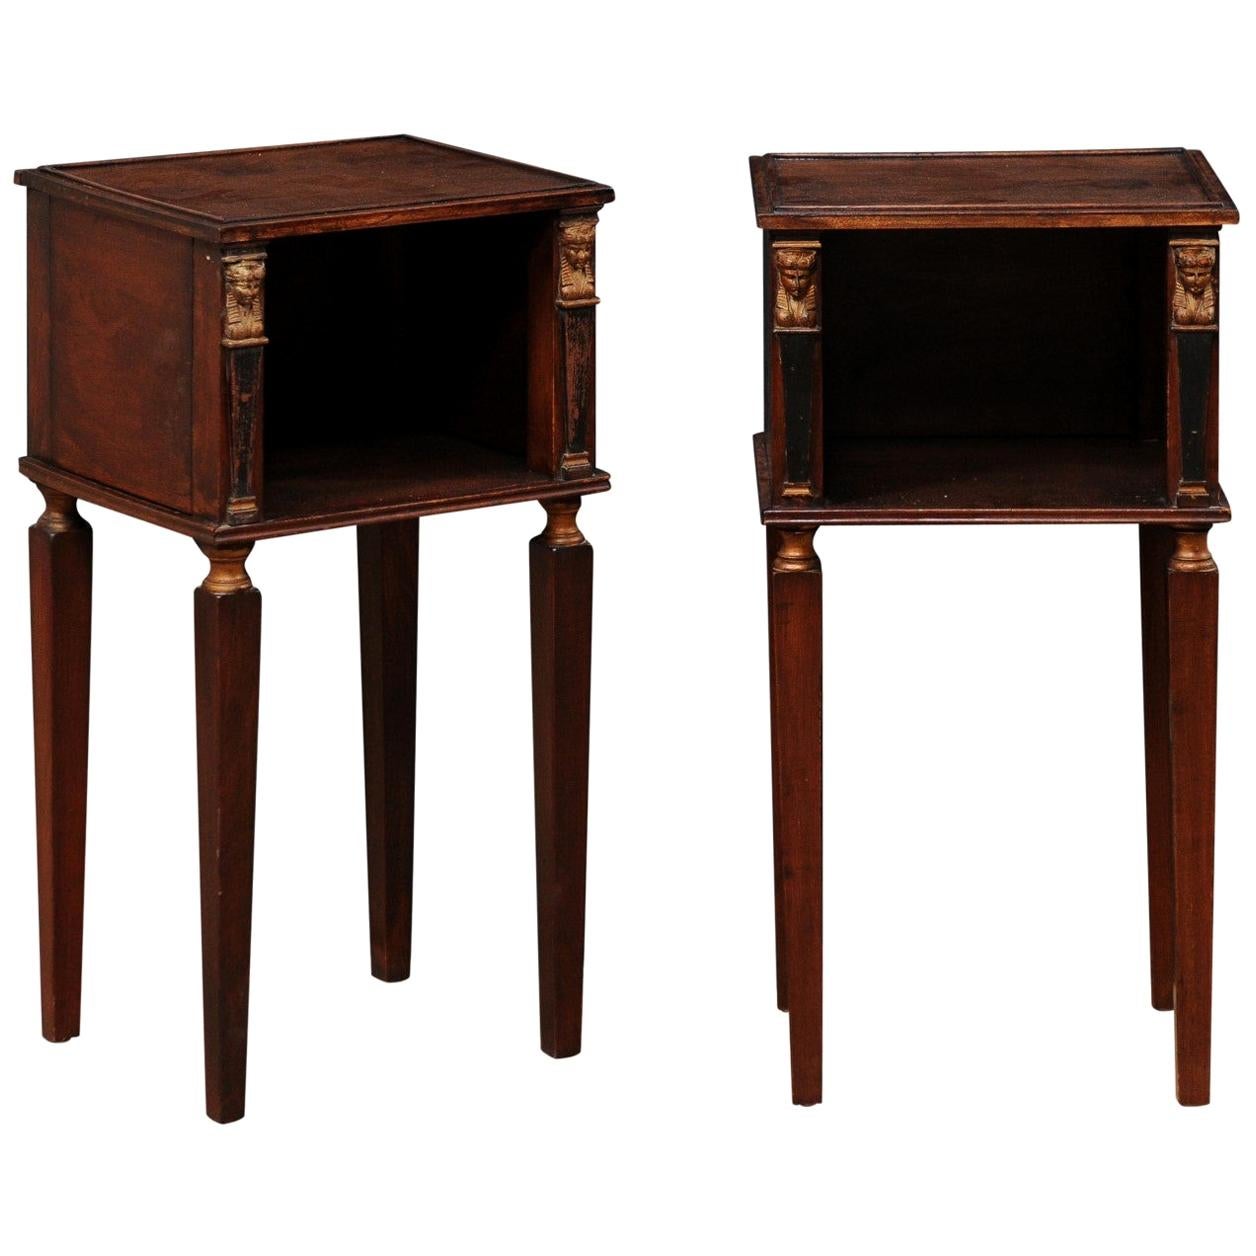 French Pair of Antique End Tables, Adorn with Egyptian Revival Accents